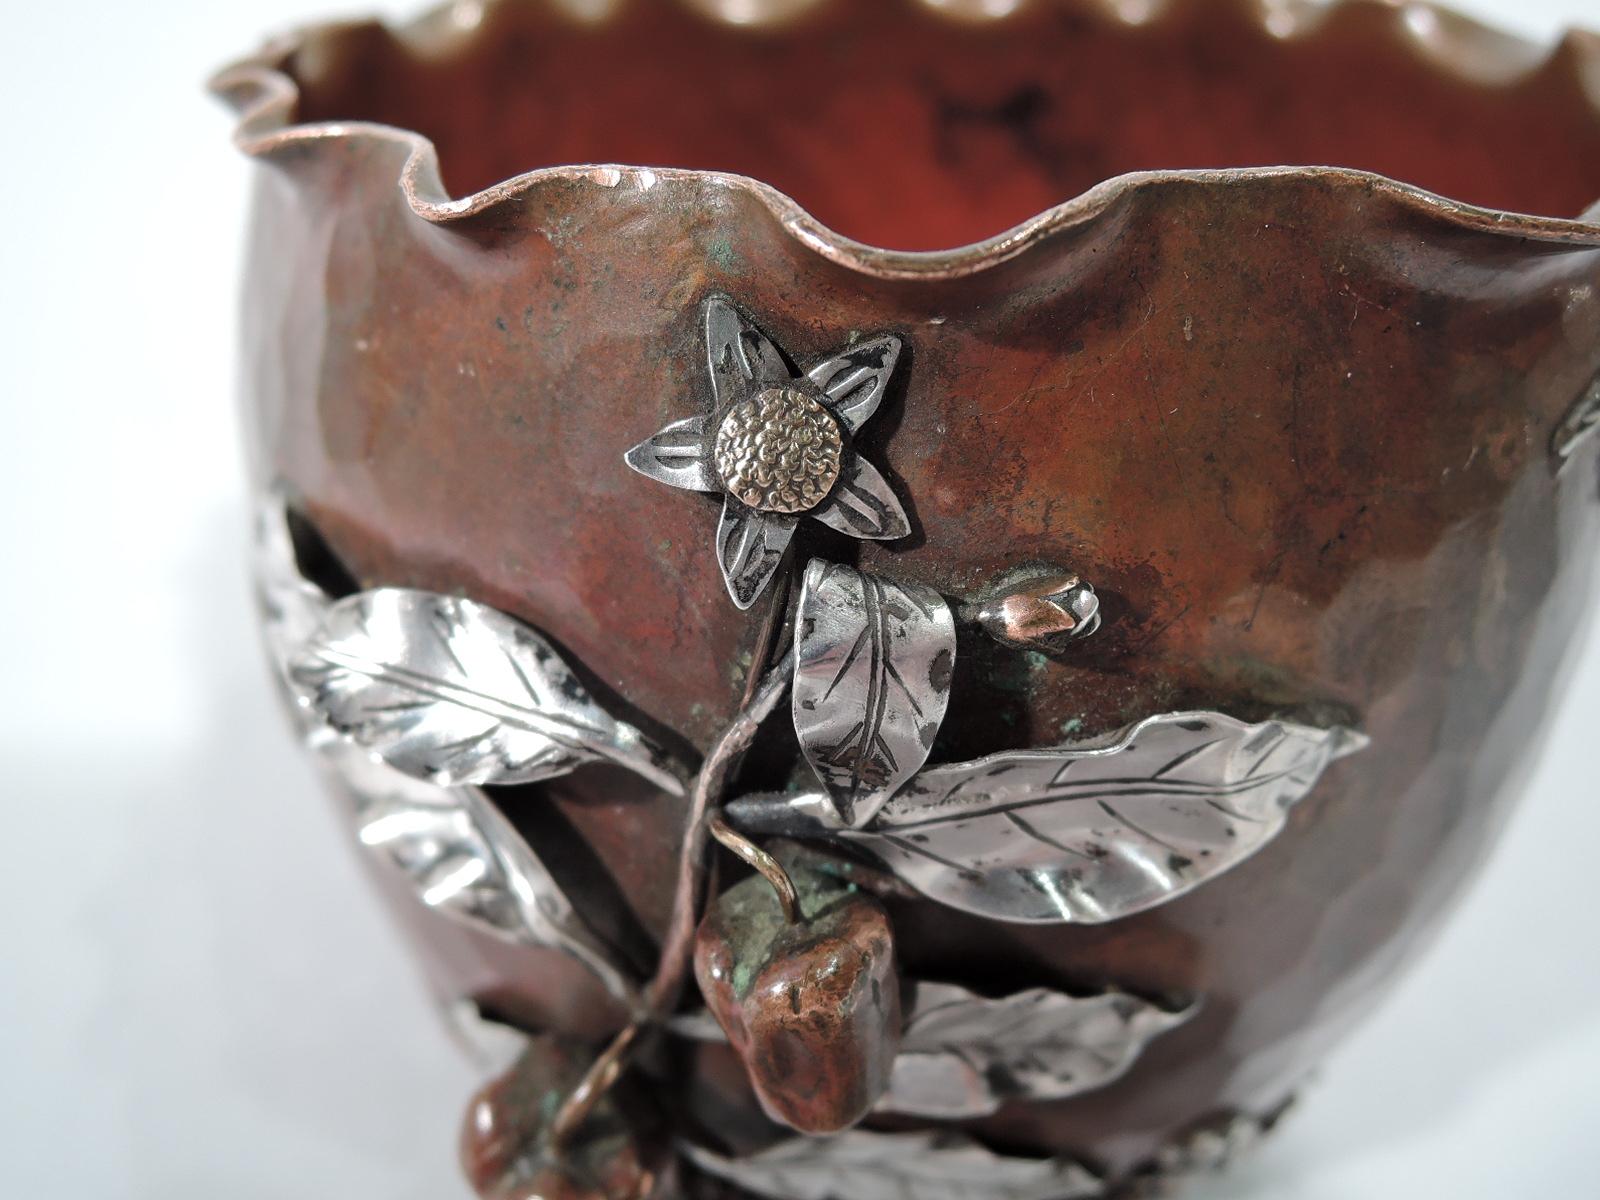 Hammered Gorham Japonesque Copper and Silver Mixed Metal Bird and Butterfly Bowl